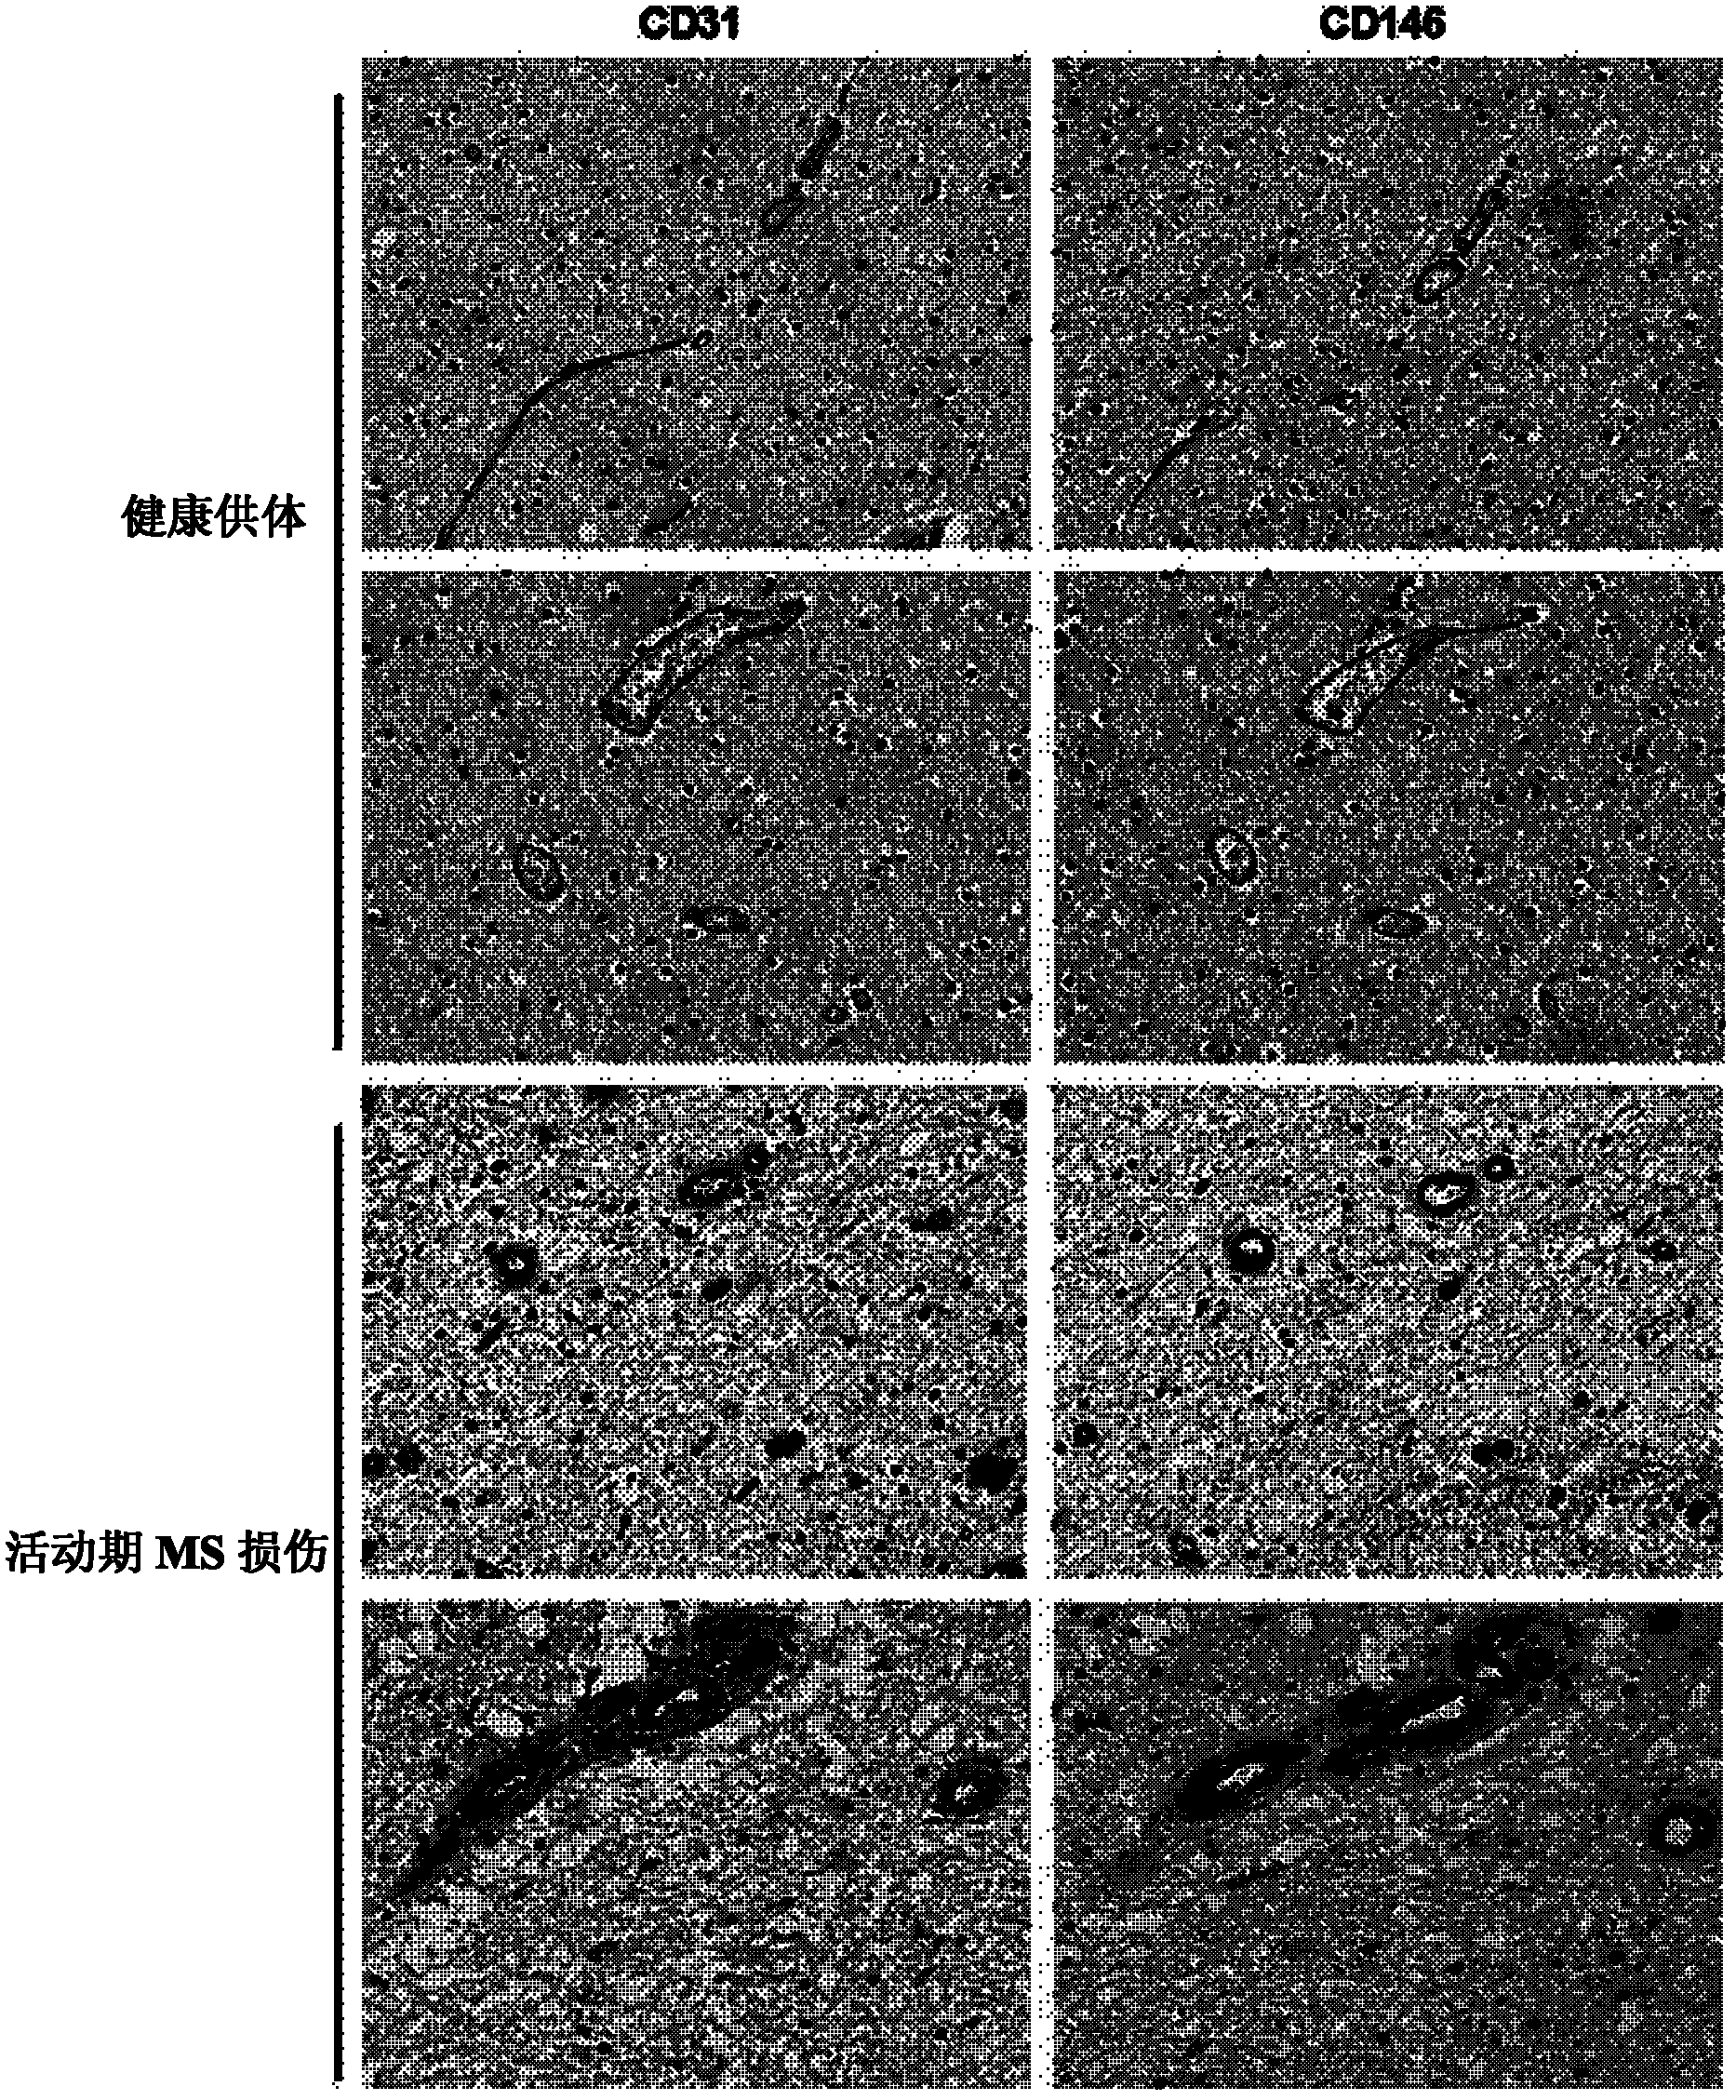 CD (cluster differentiation) 146 and application thereof to antibody diagnosis and treatment for inflammable diseases such as autoimmunity diseases